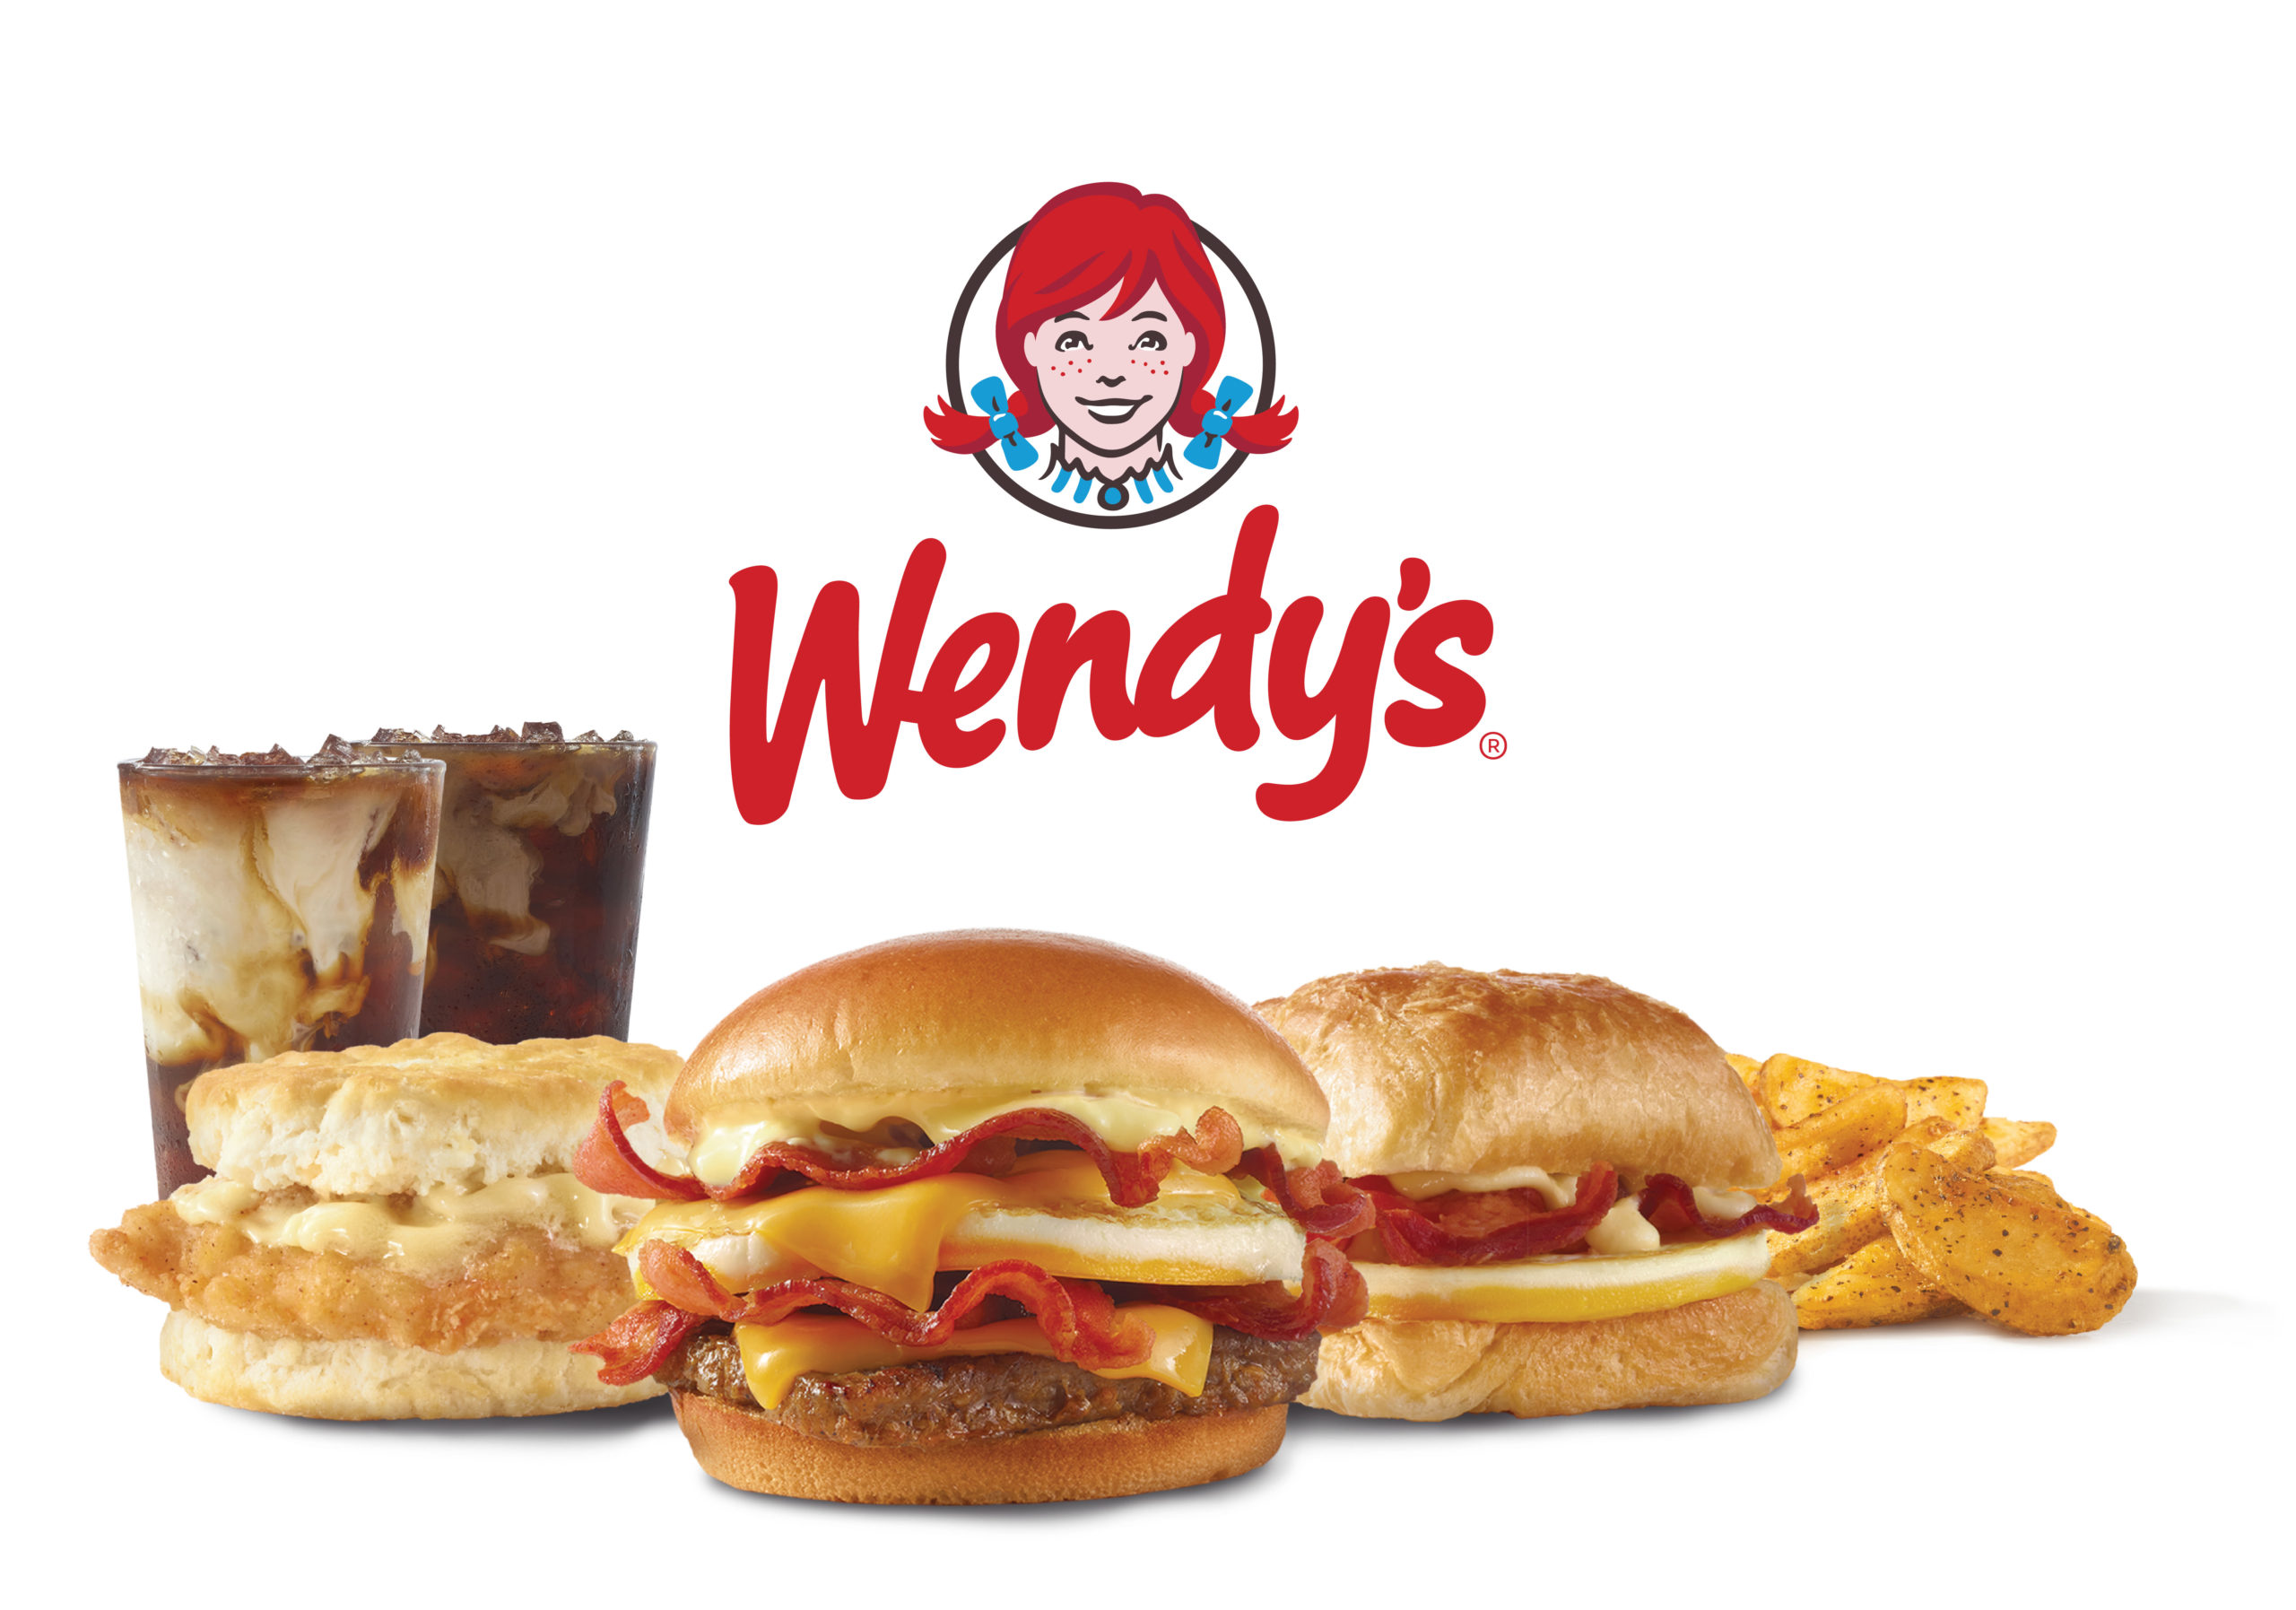 Wendy’s breakfast can succeed with out beating McDonald’s, analyst says